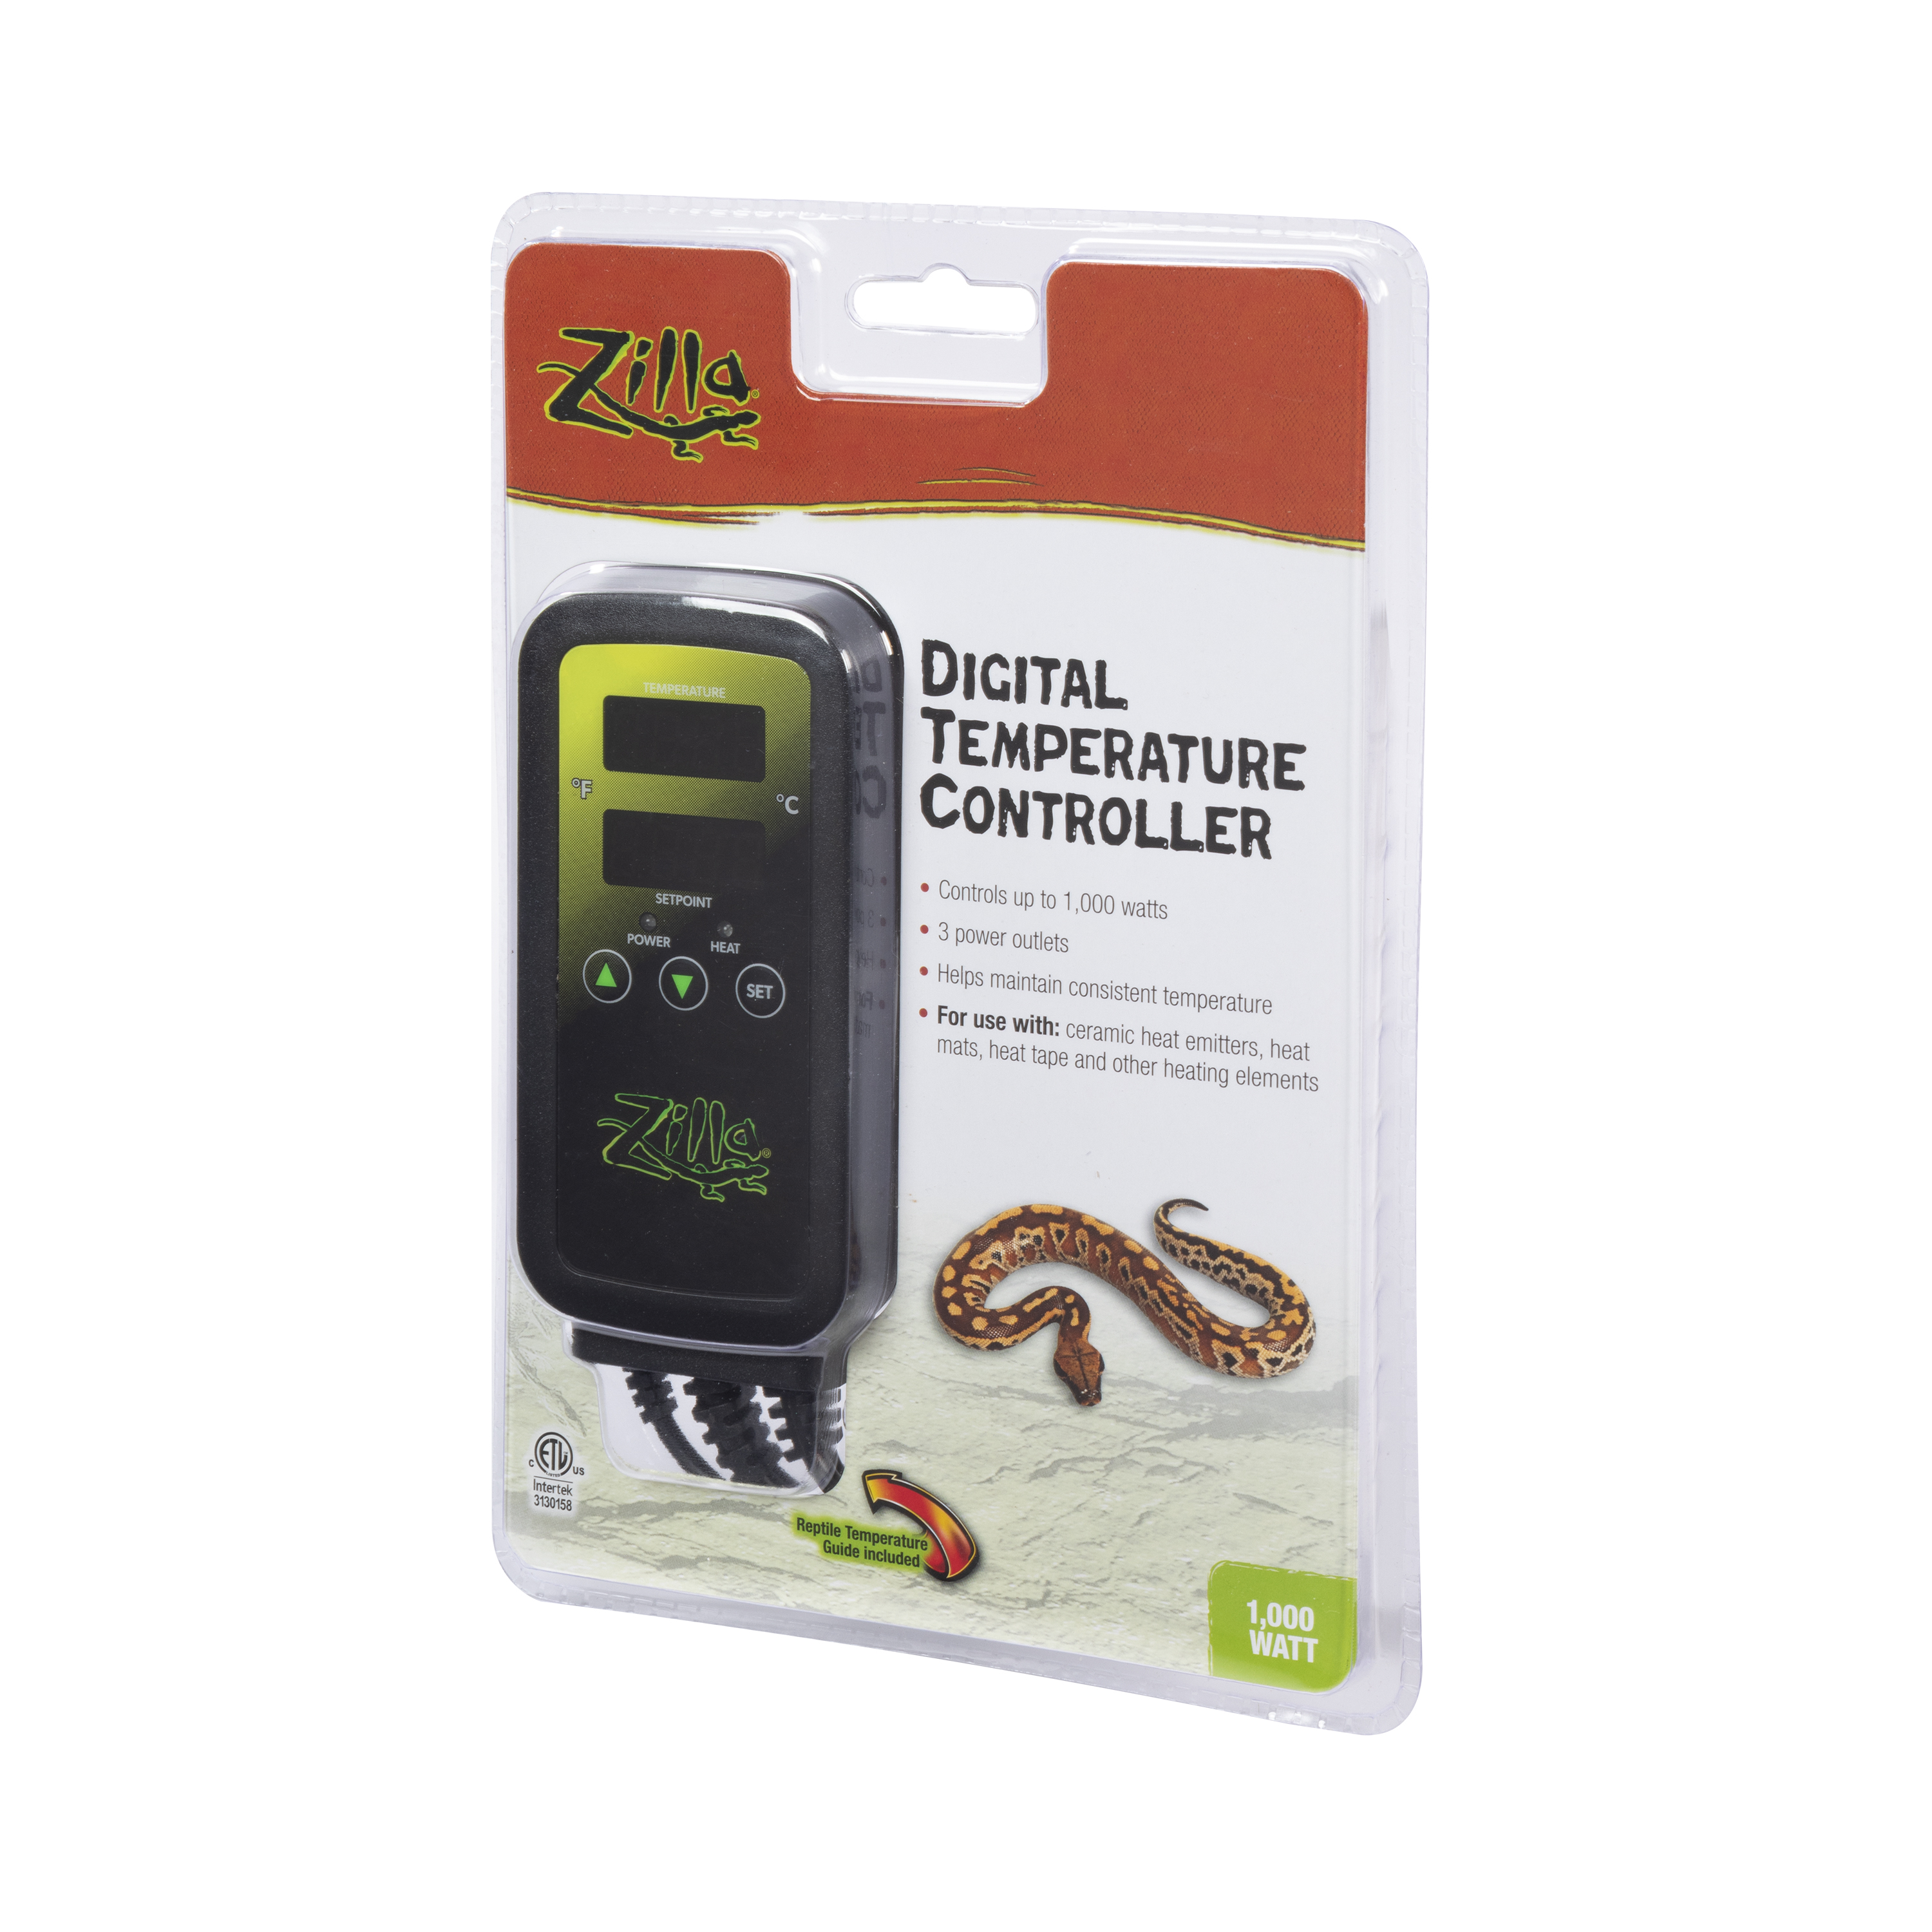 https://www.zillarules.com/-/media/project/oneweb/zilla/images/products-homepage/product-images/heat-emitters/digital-temp-controller/zl_digitaltempcontroller_540541_front3q.jpg